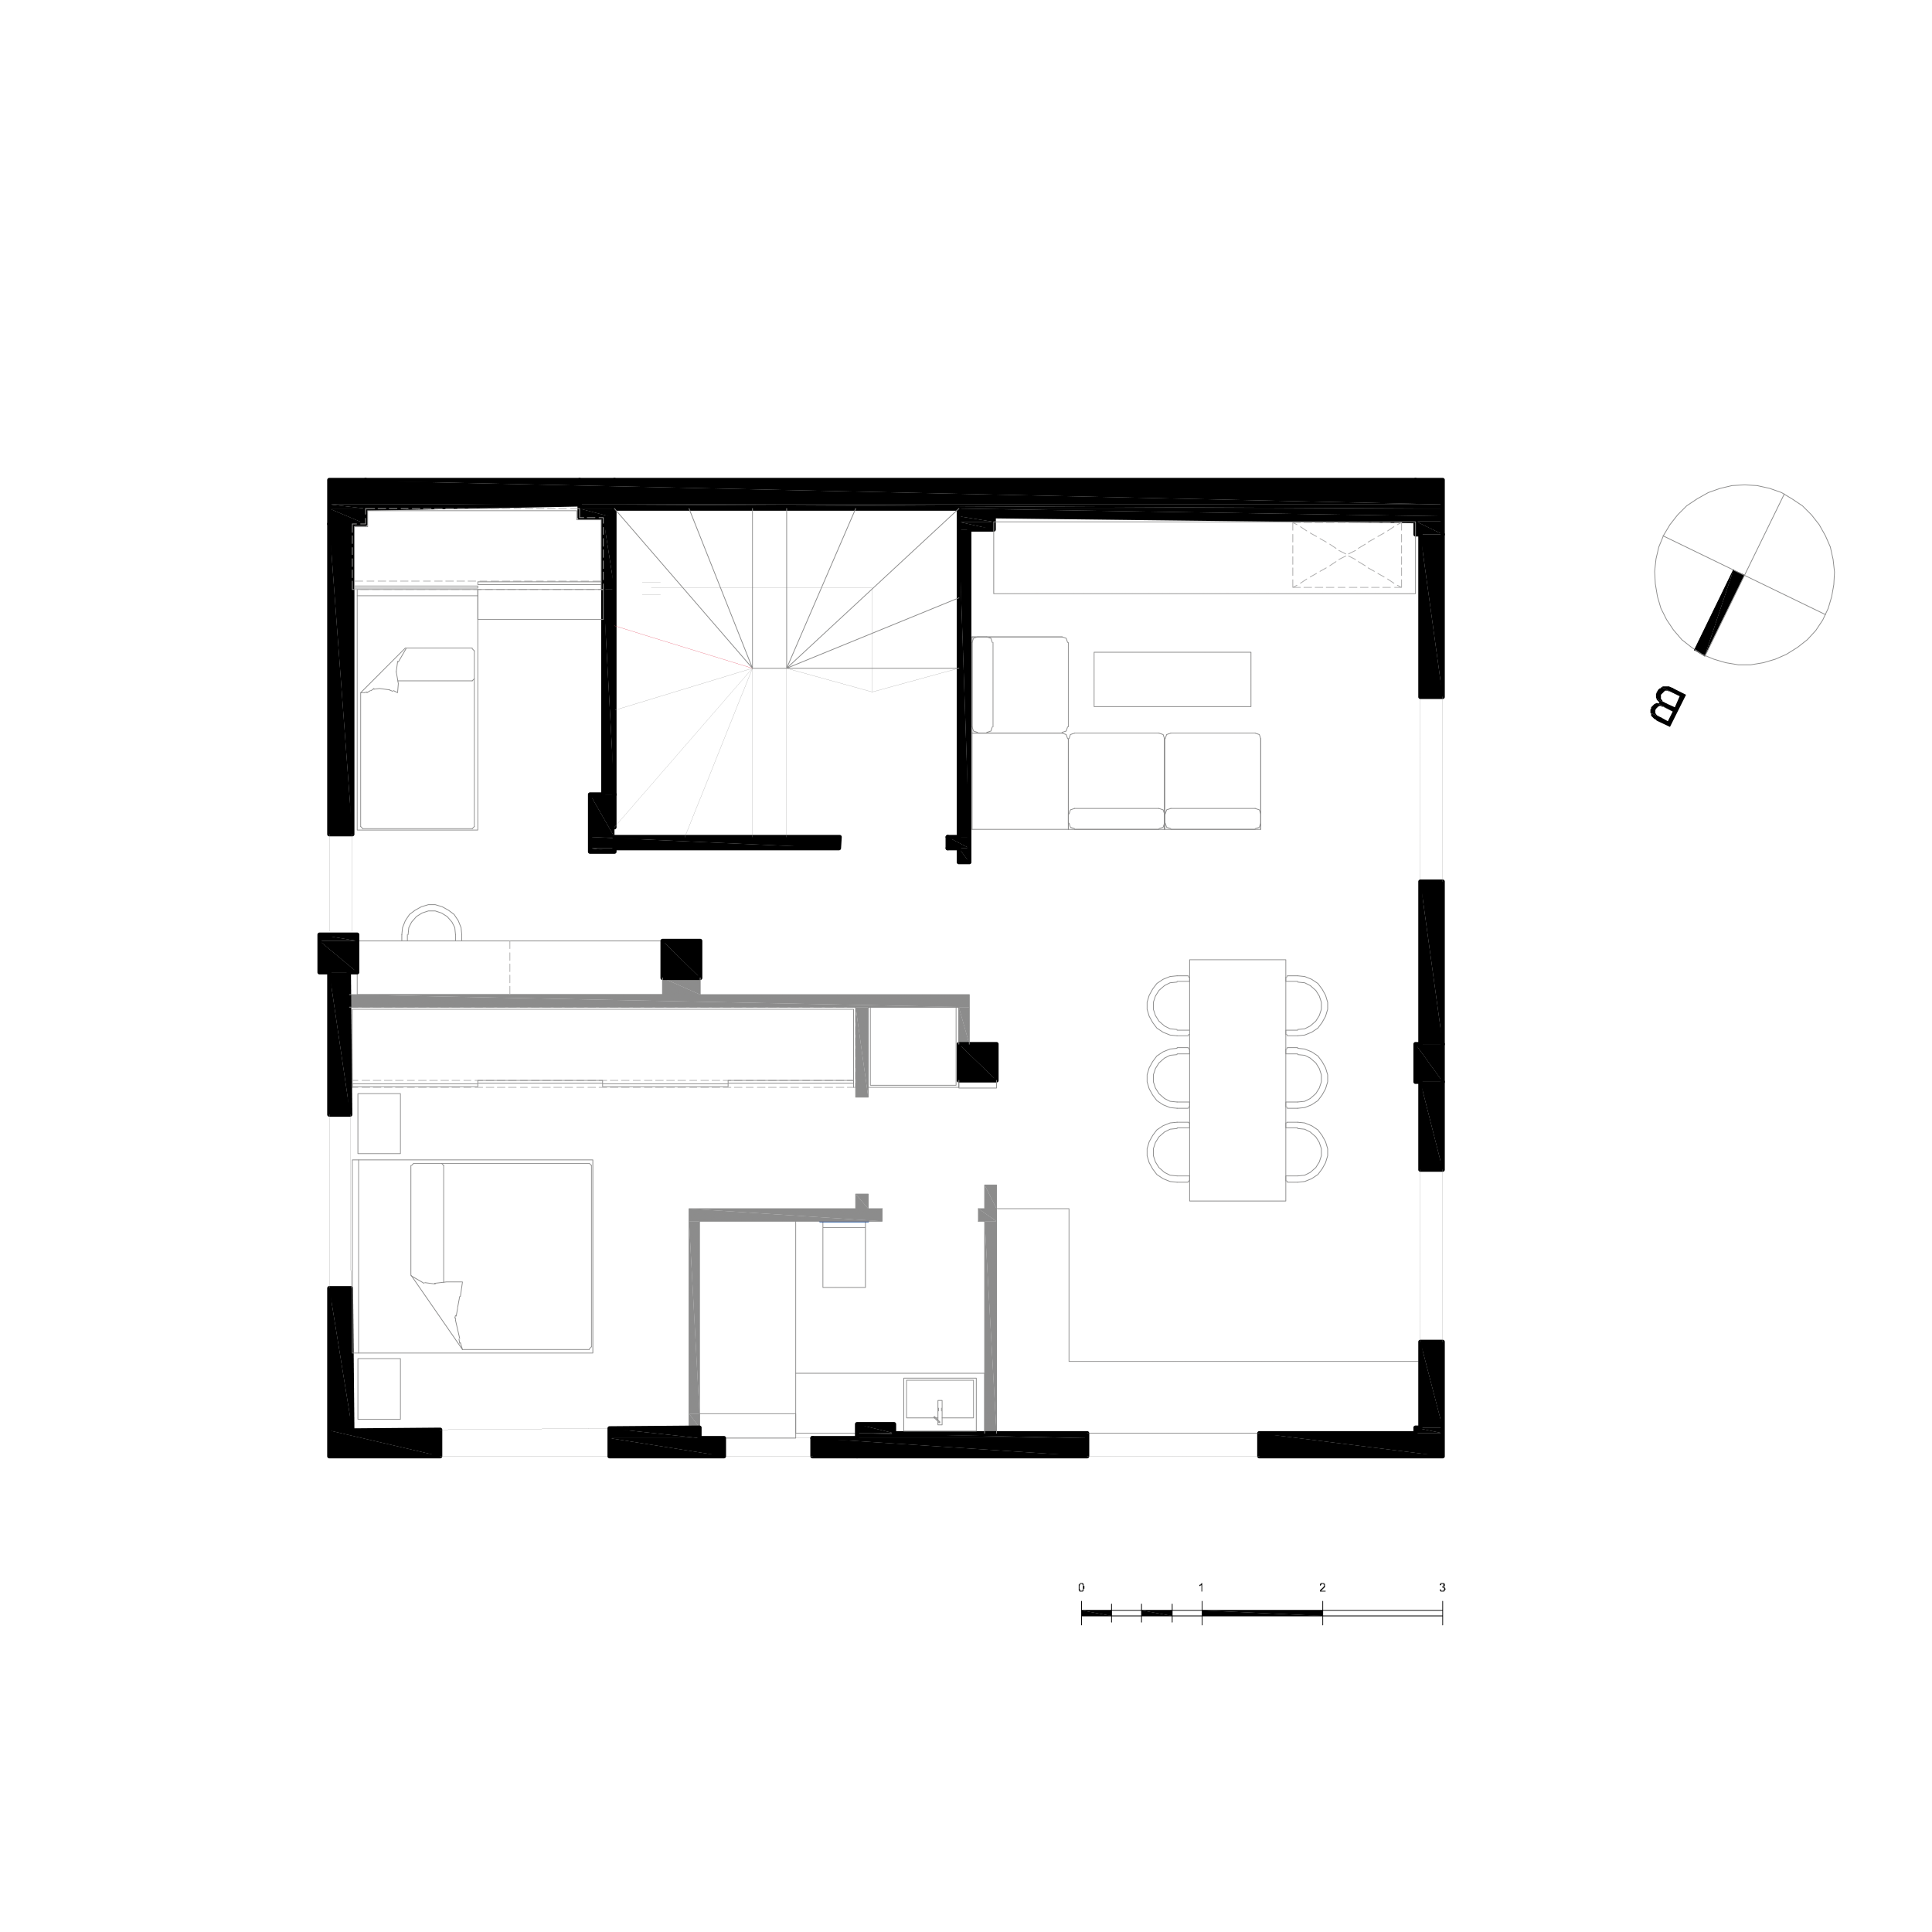 IXNOS Architects apartment in Argiroupoli. Top View Drawing.